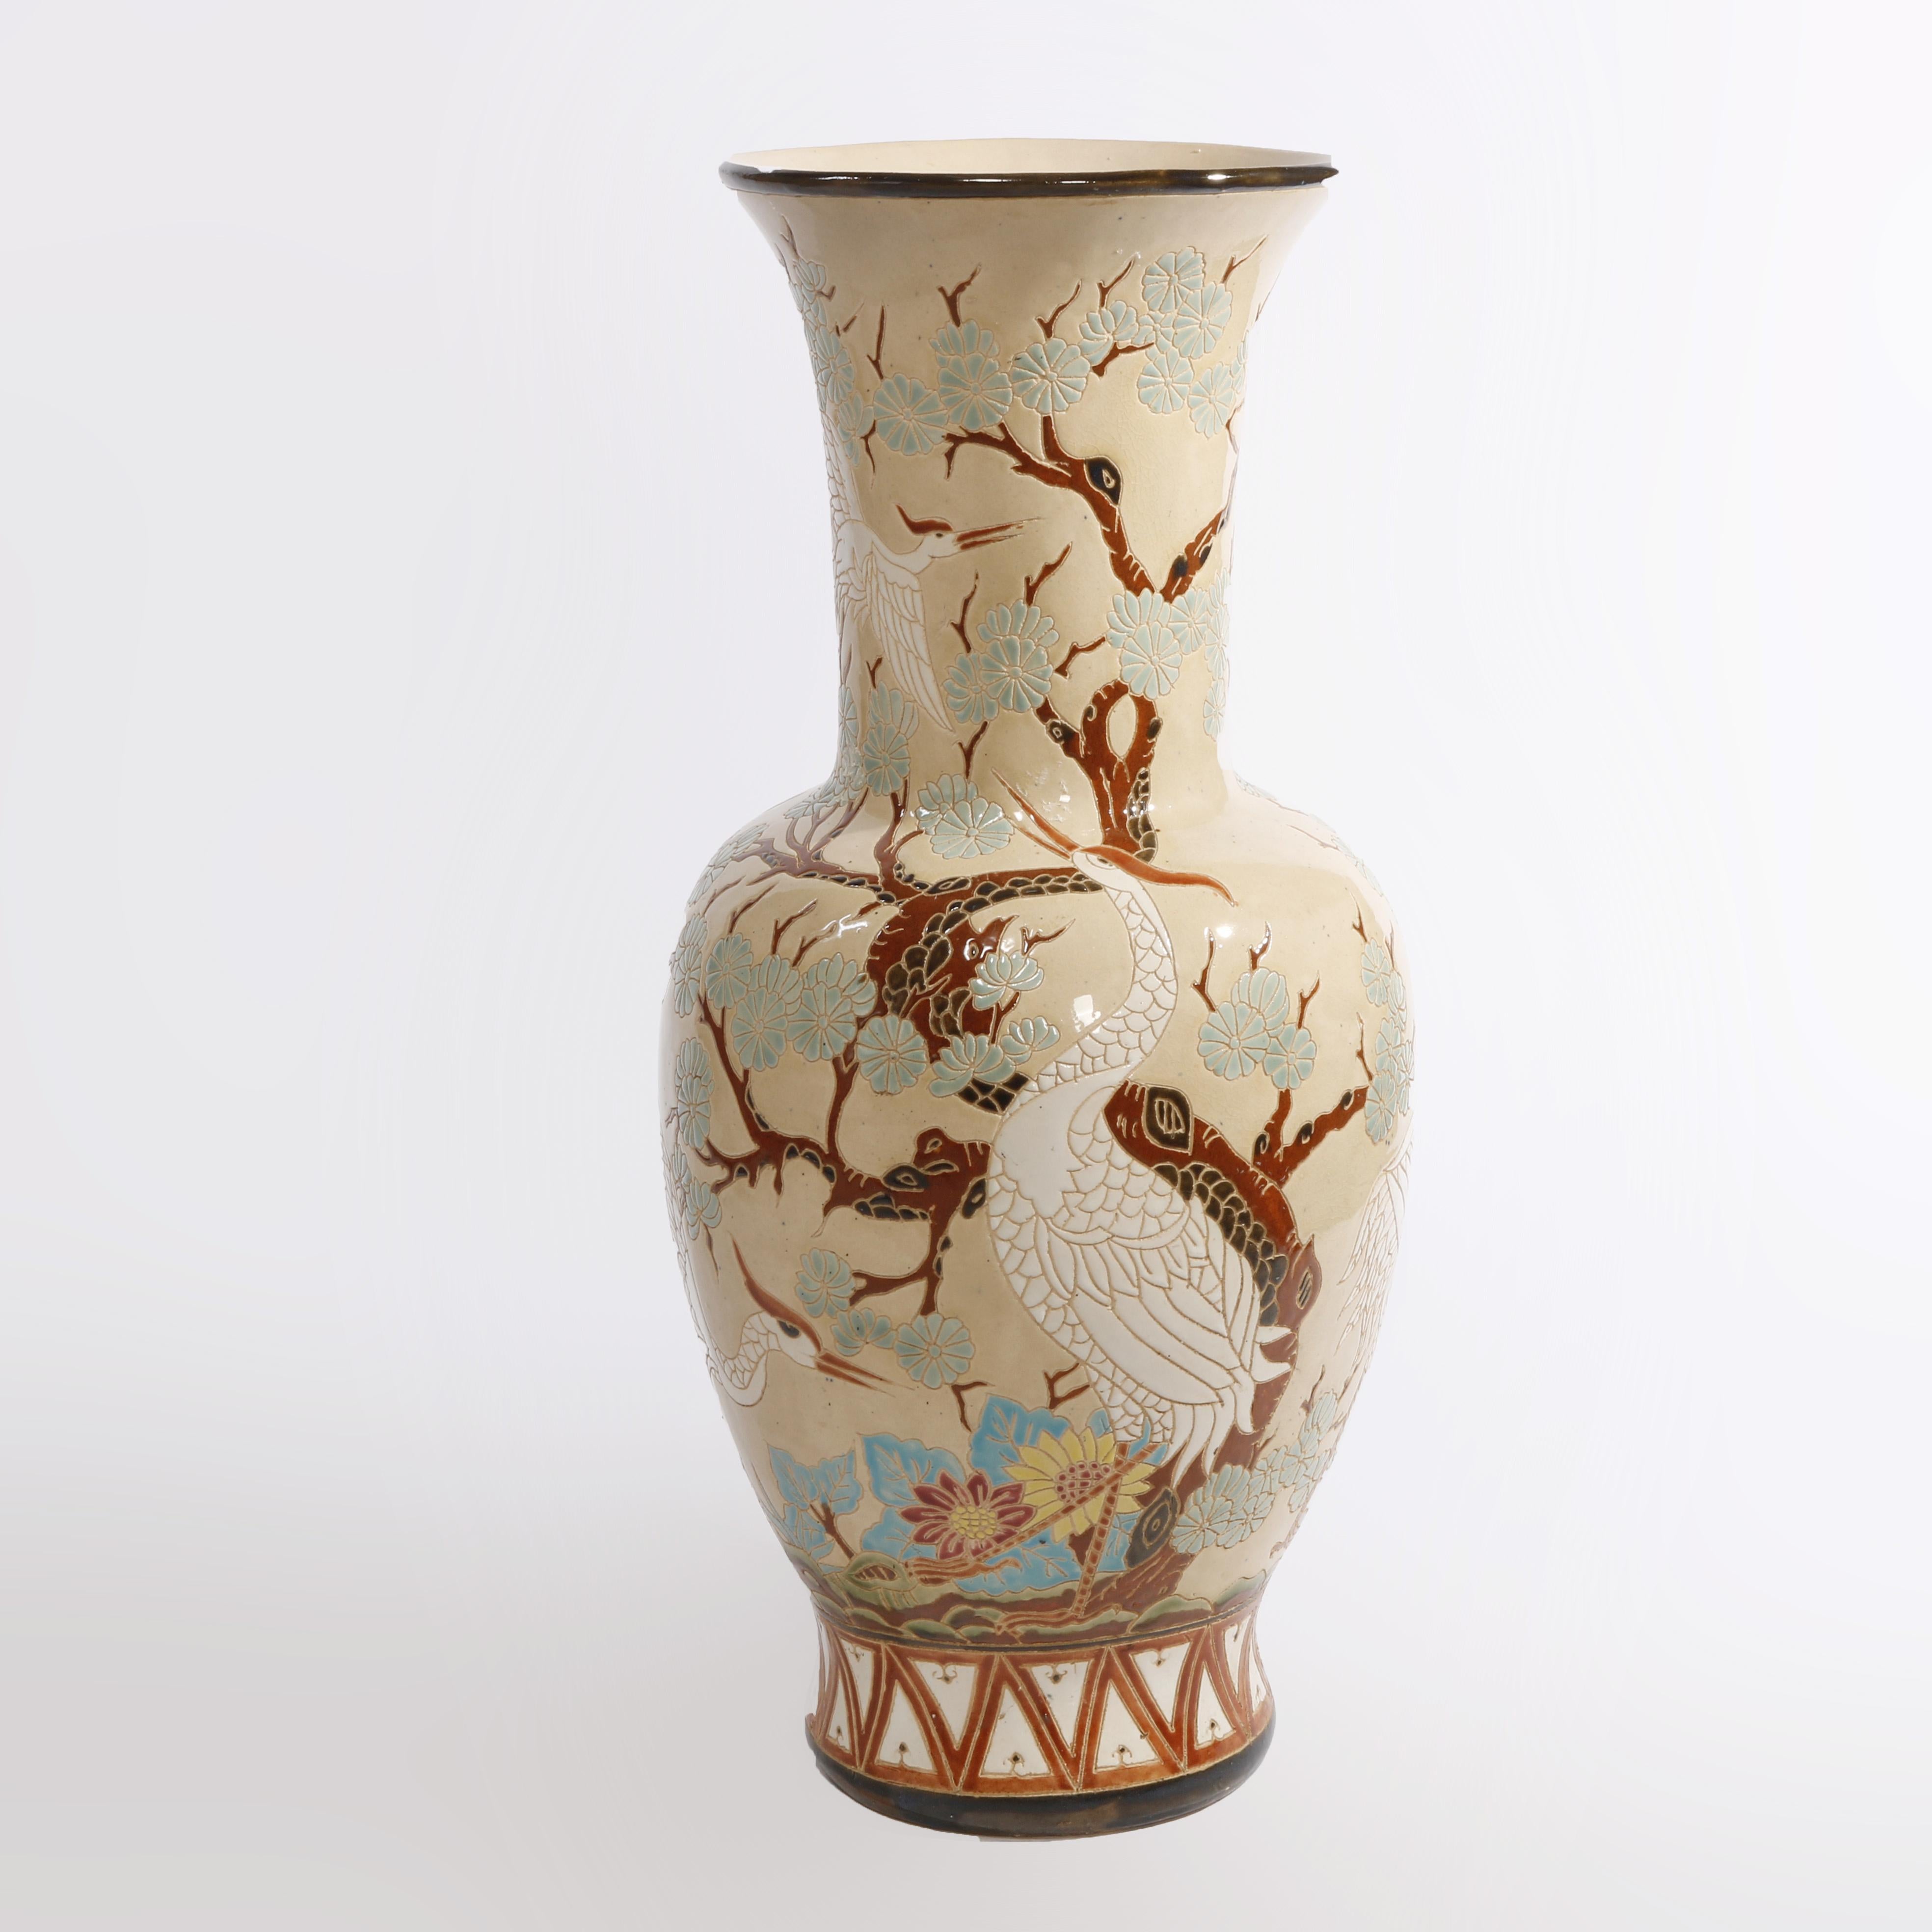 A Chinese floor vase offers pottery construction with allover marsh scene having cherry blossoms and cranes, 20th century

Measures - 32.5''h x 14.5''w x 14.5''d